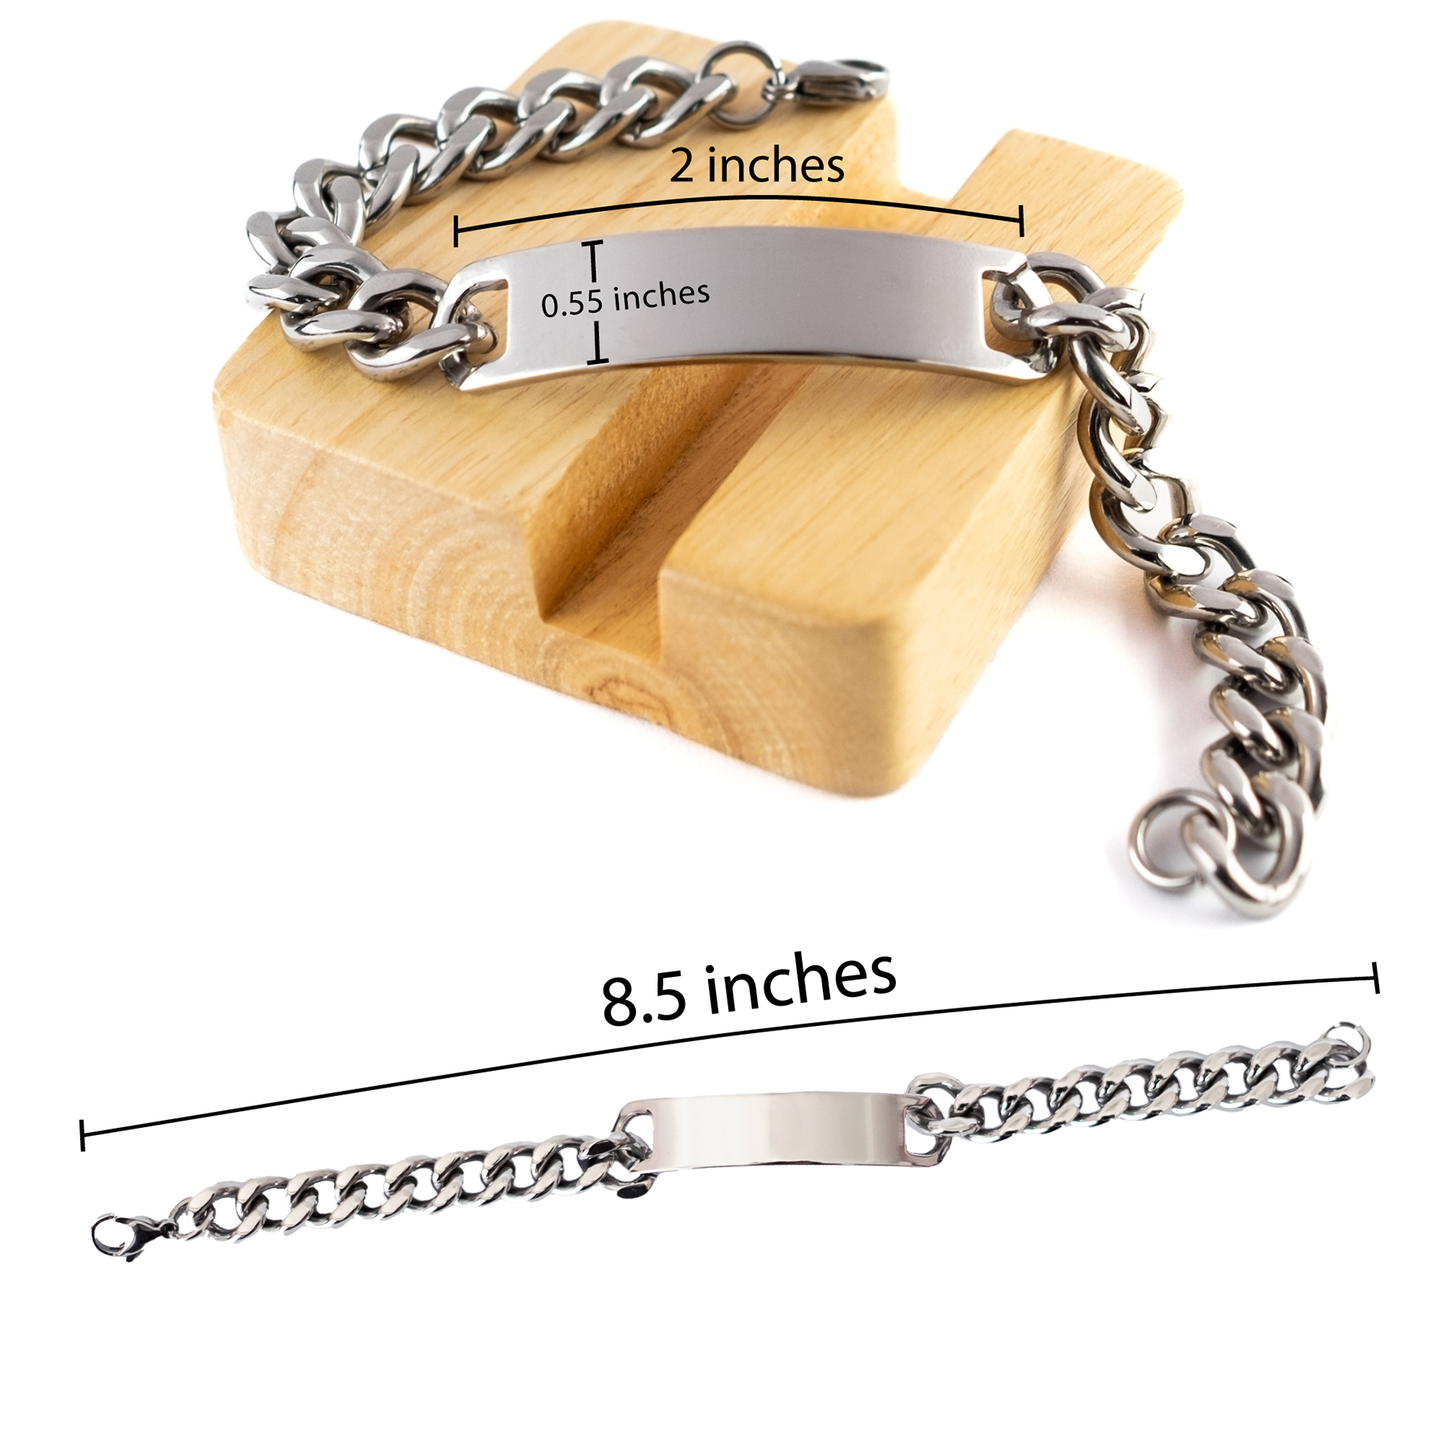 To My Grandpop Thank You Gifts, You are appreciated more than you know, Appreciation Cuban Chain Stainless Steel Bracelet for Grandpop, Birthday Unique Gifts for Grandpop